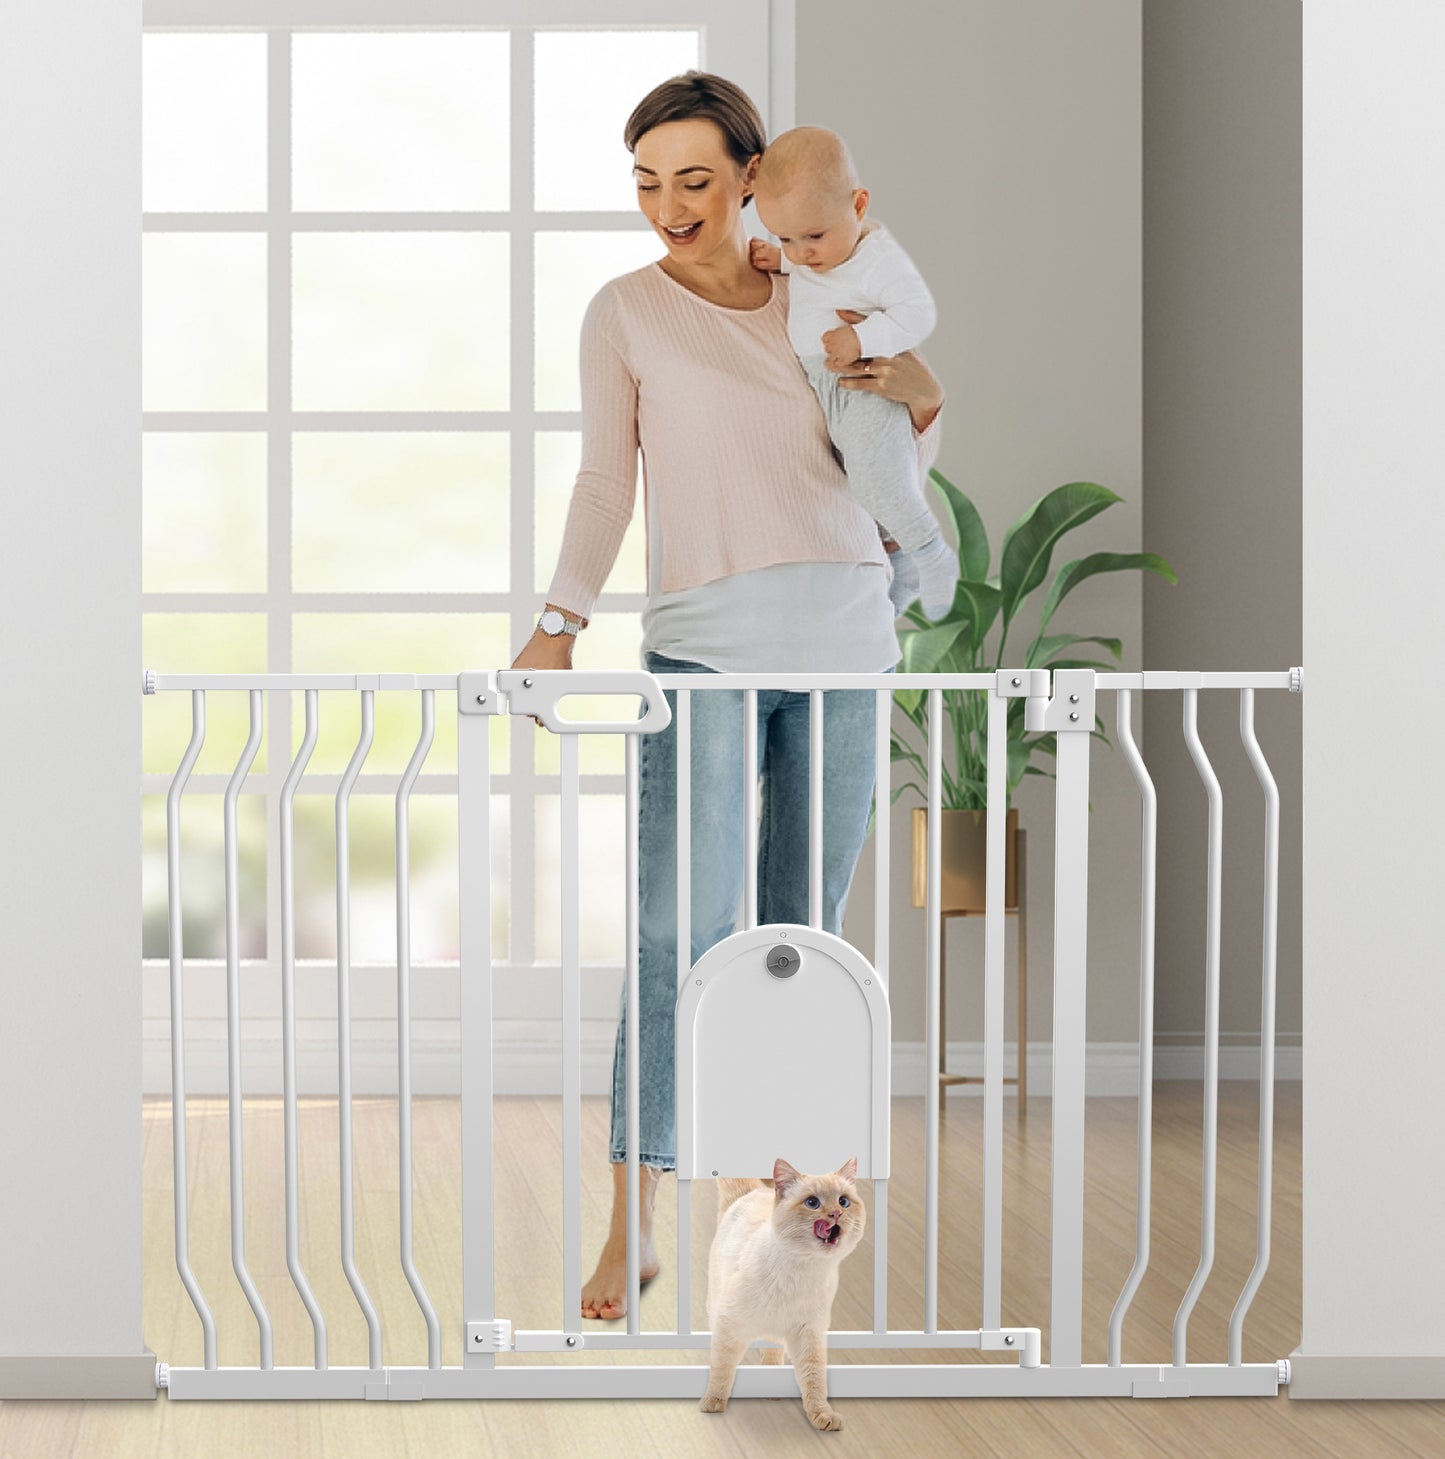 Wisairt Baby Gate for Stairs Doorways with Small Pet Door,29-48Inches Extra Wide Walk Auto-Close Safety Baby Gate,Pressure Mounted